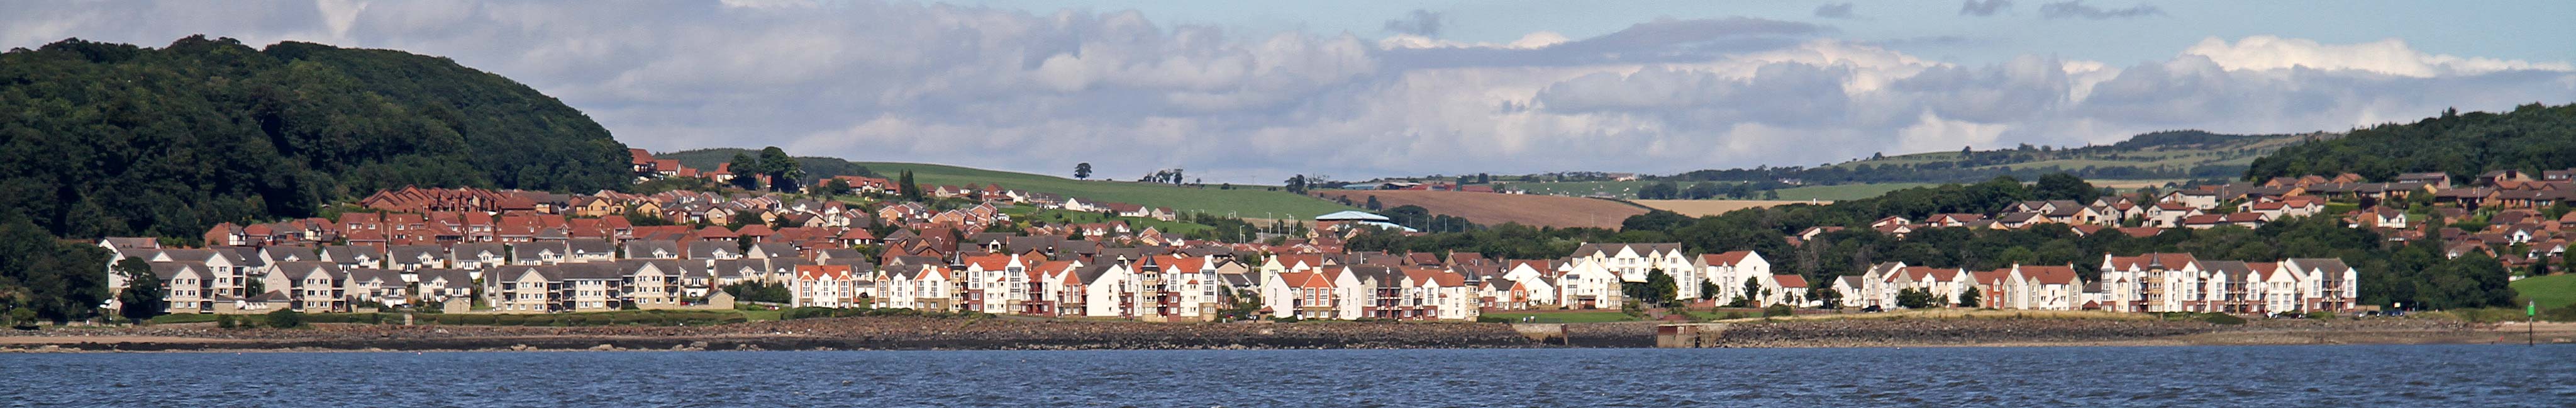 Dalgety Bay  -  View from the Firth of Forth